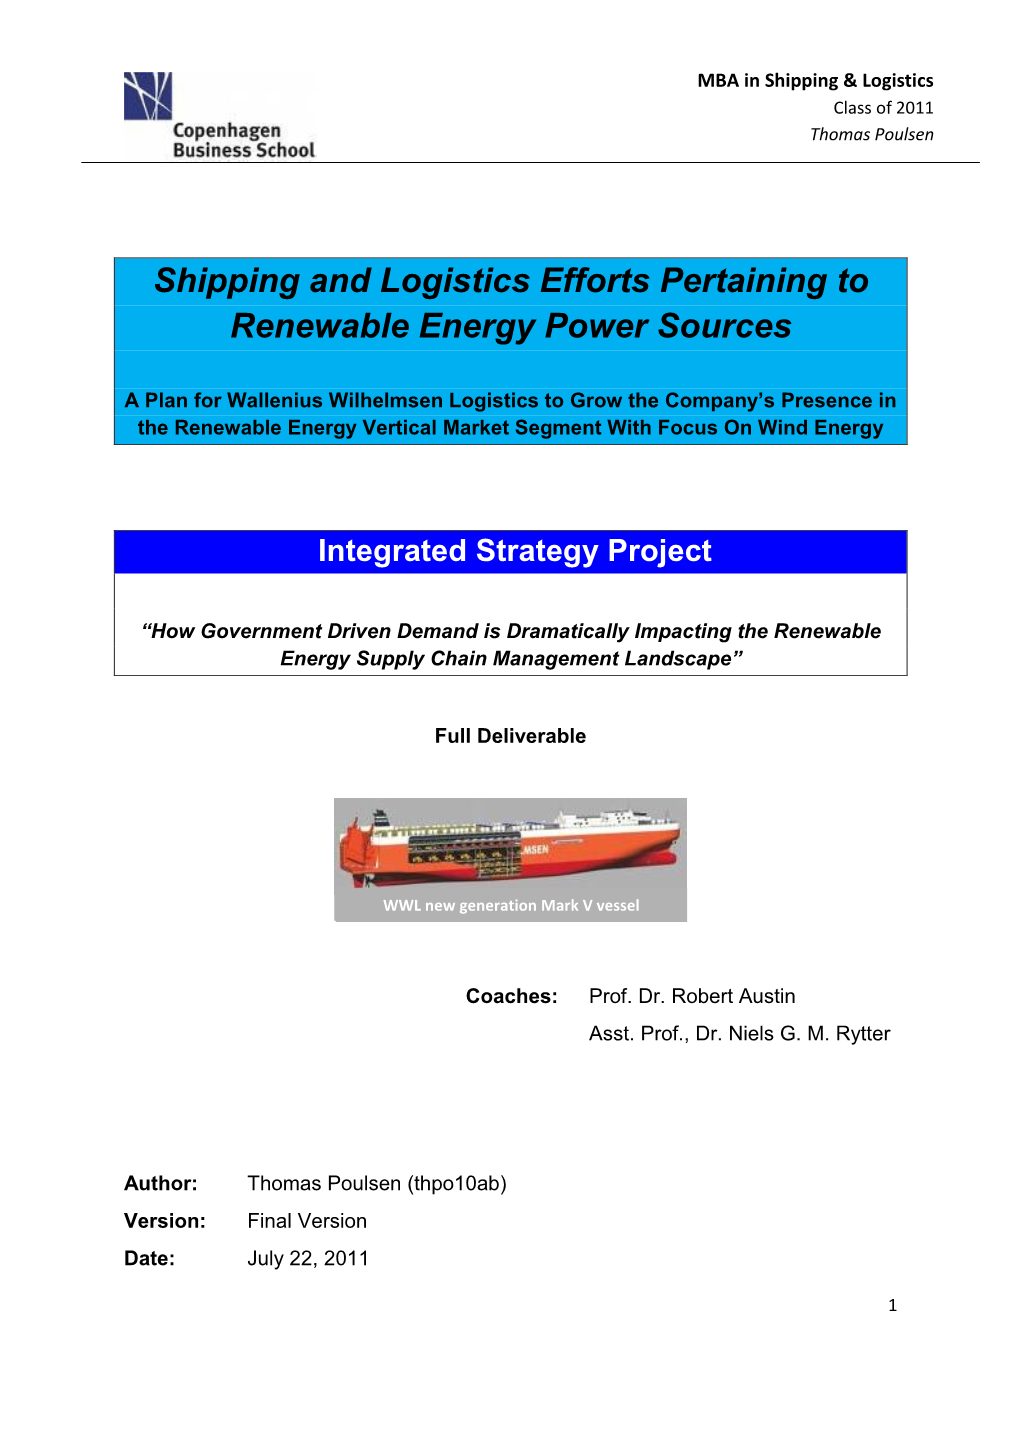 Shipping and Logistics Efforts Pertaining to Renewable Energy Power Sources